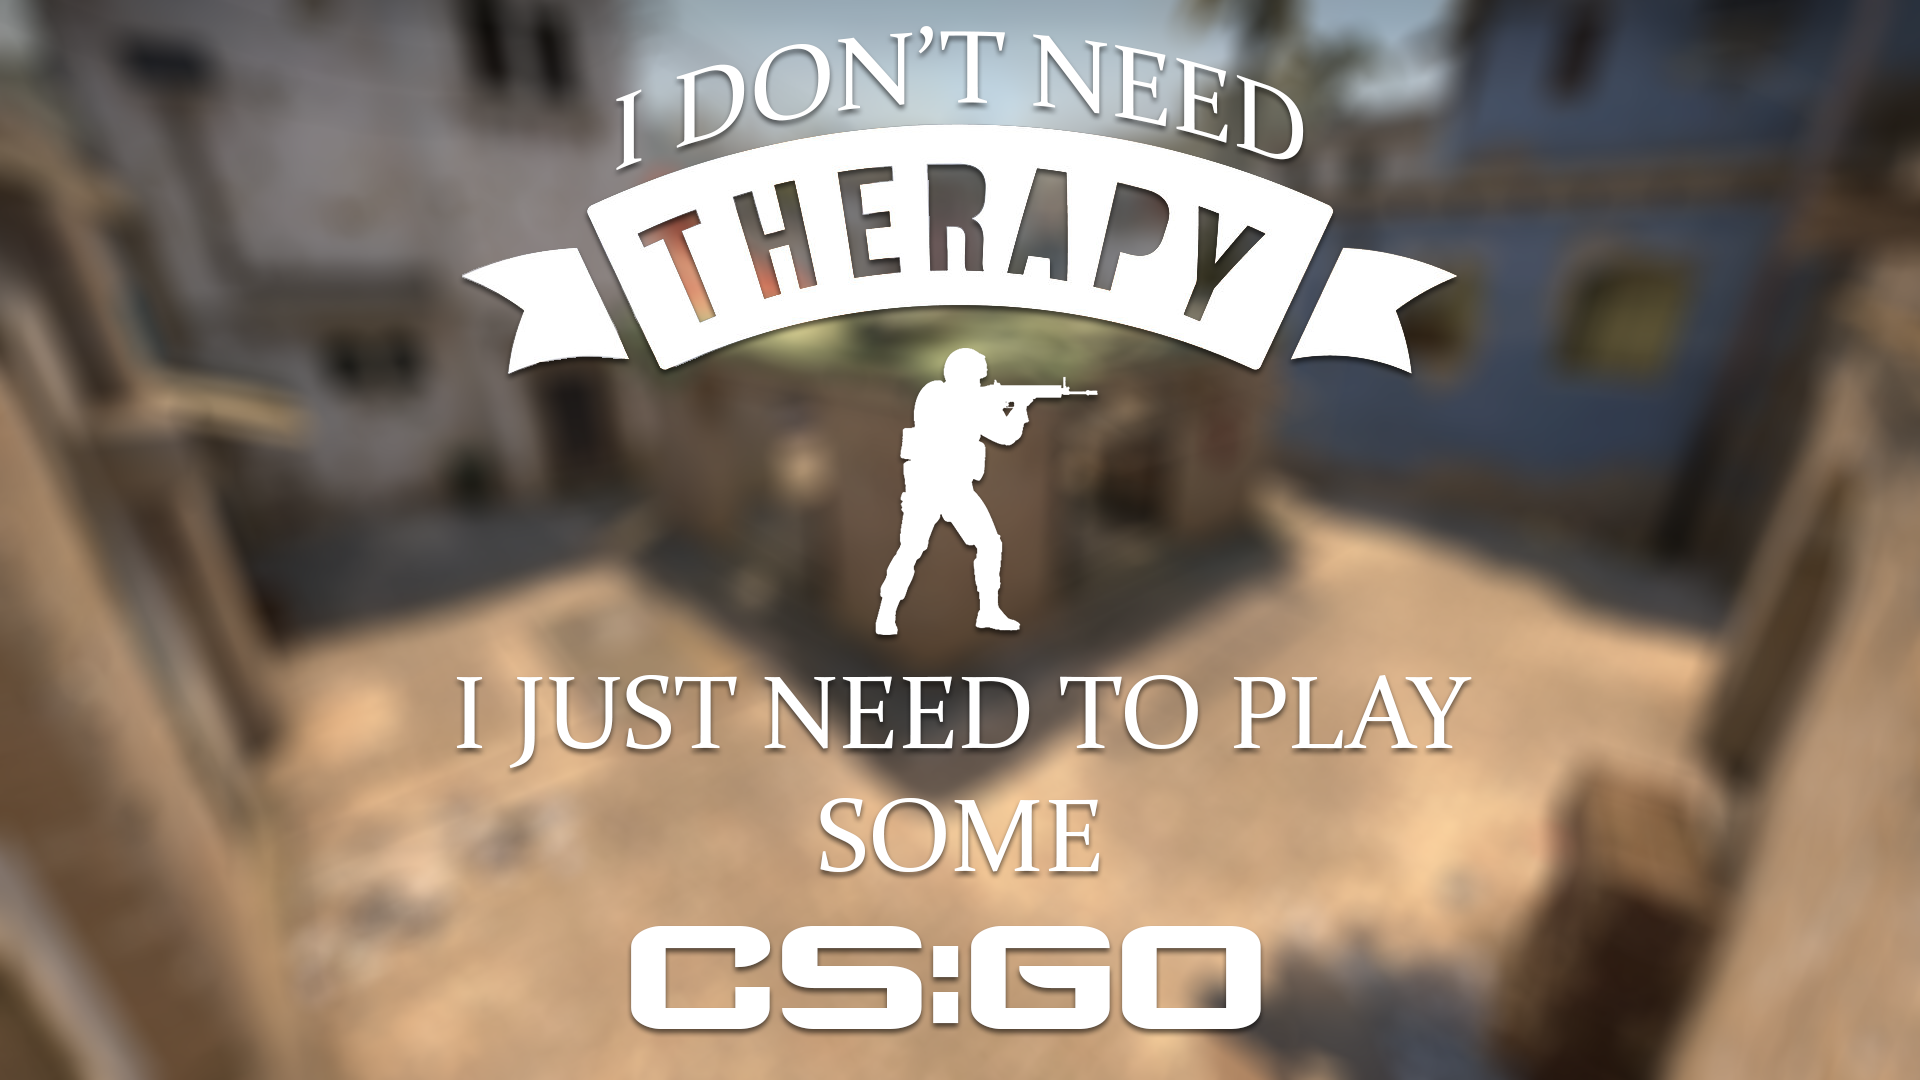 I don't need therapy (Desktop) wallpaper